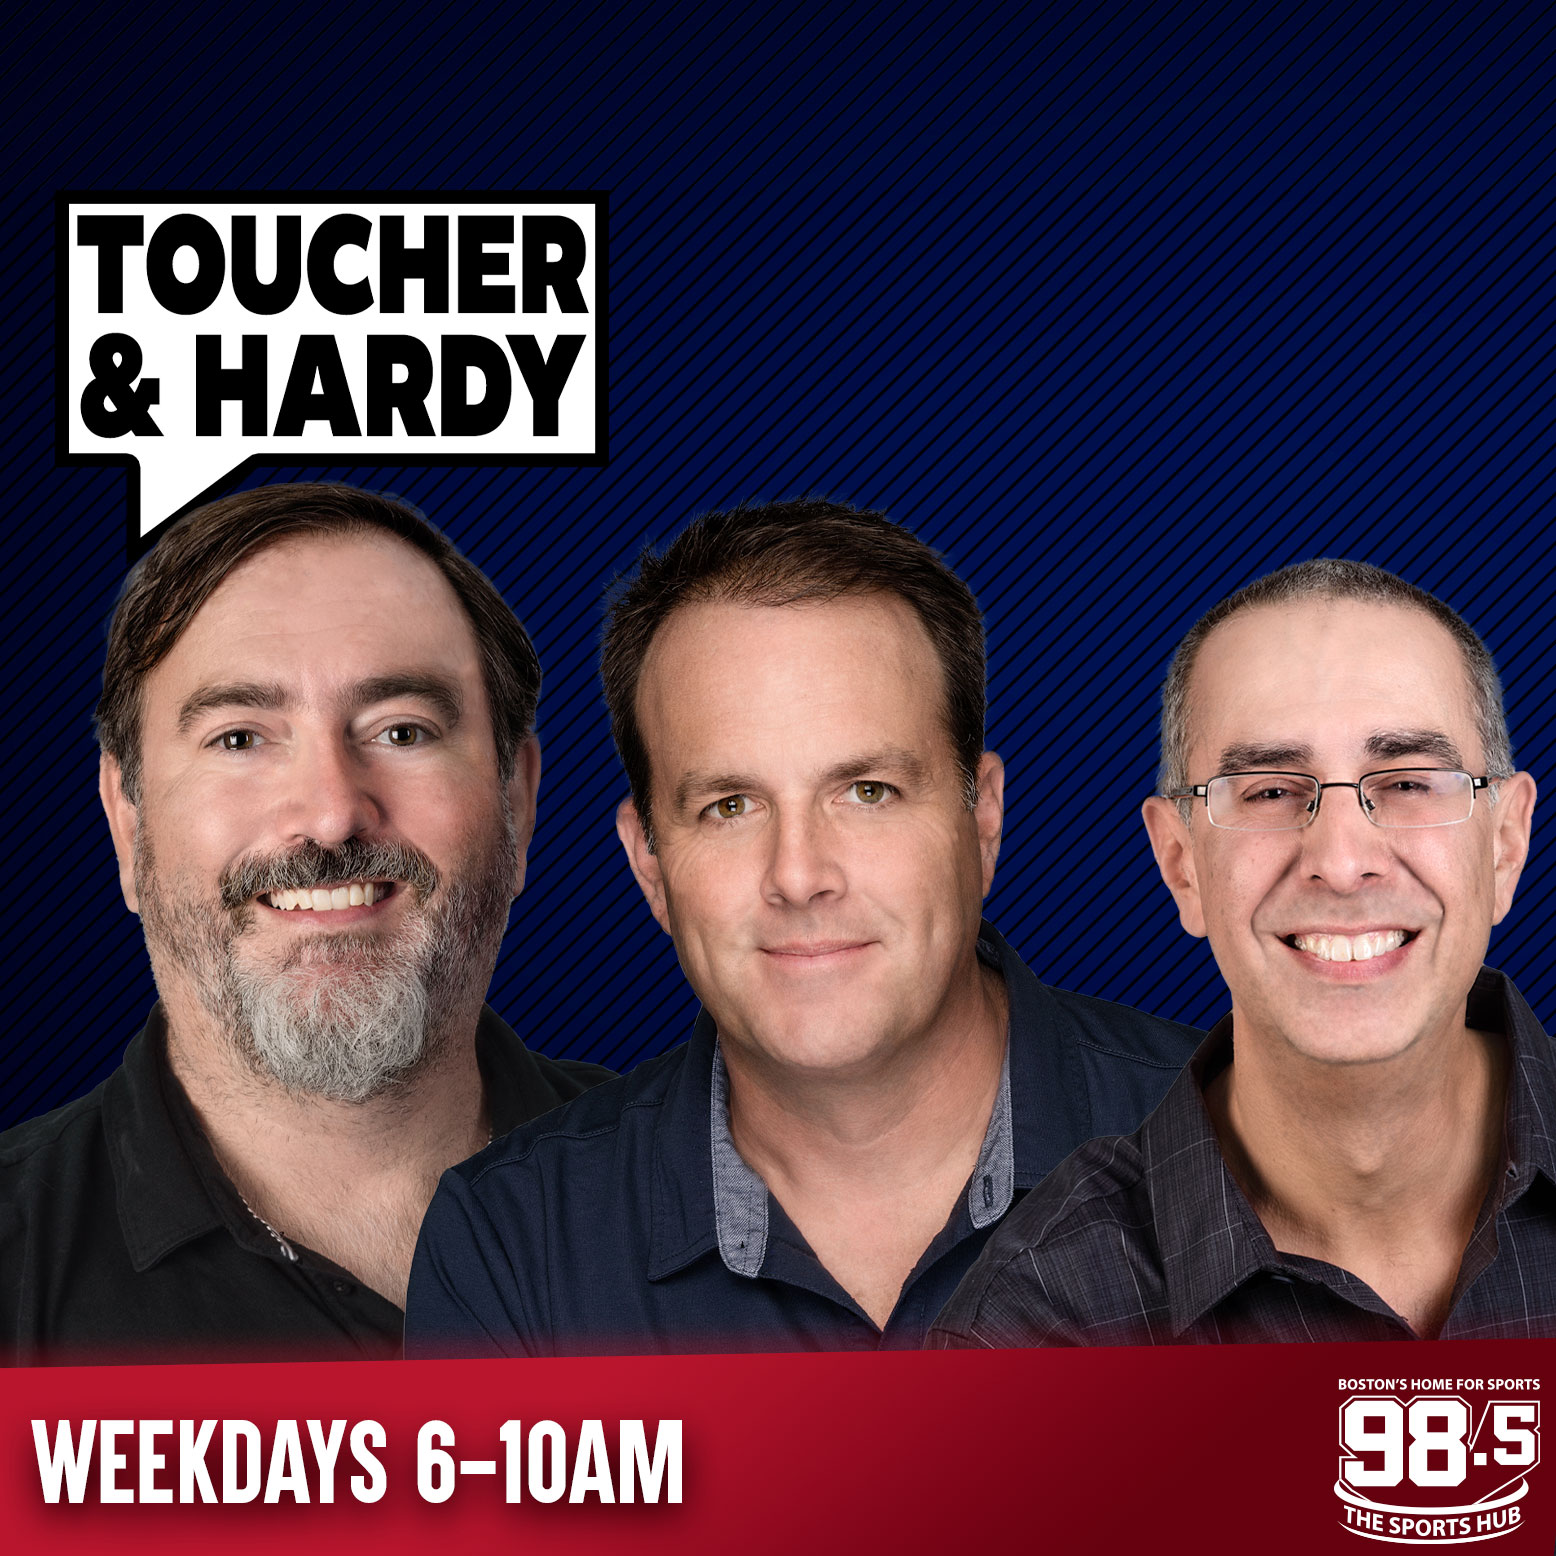 NESN’s Billy Jaffe Joins Toucher & Rich // Bruins Nick Foligno // The Stack - 12/15 (Hour 4)